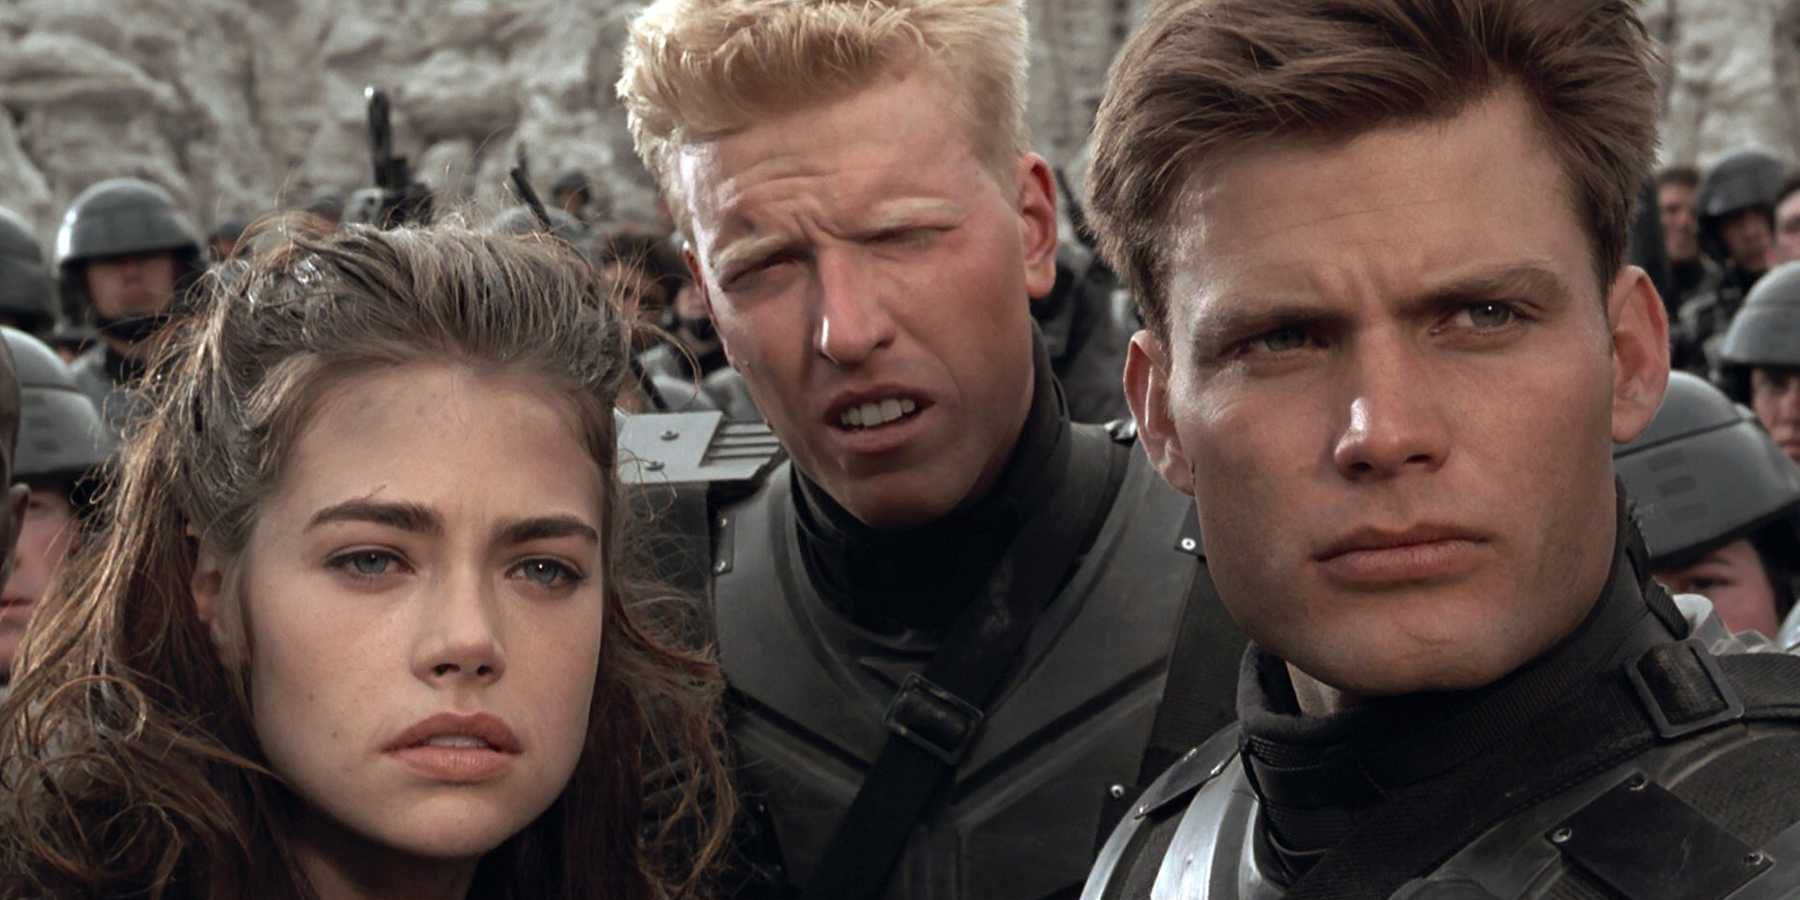 Starship Troopers' soldiers scowling while hearing bad news